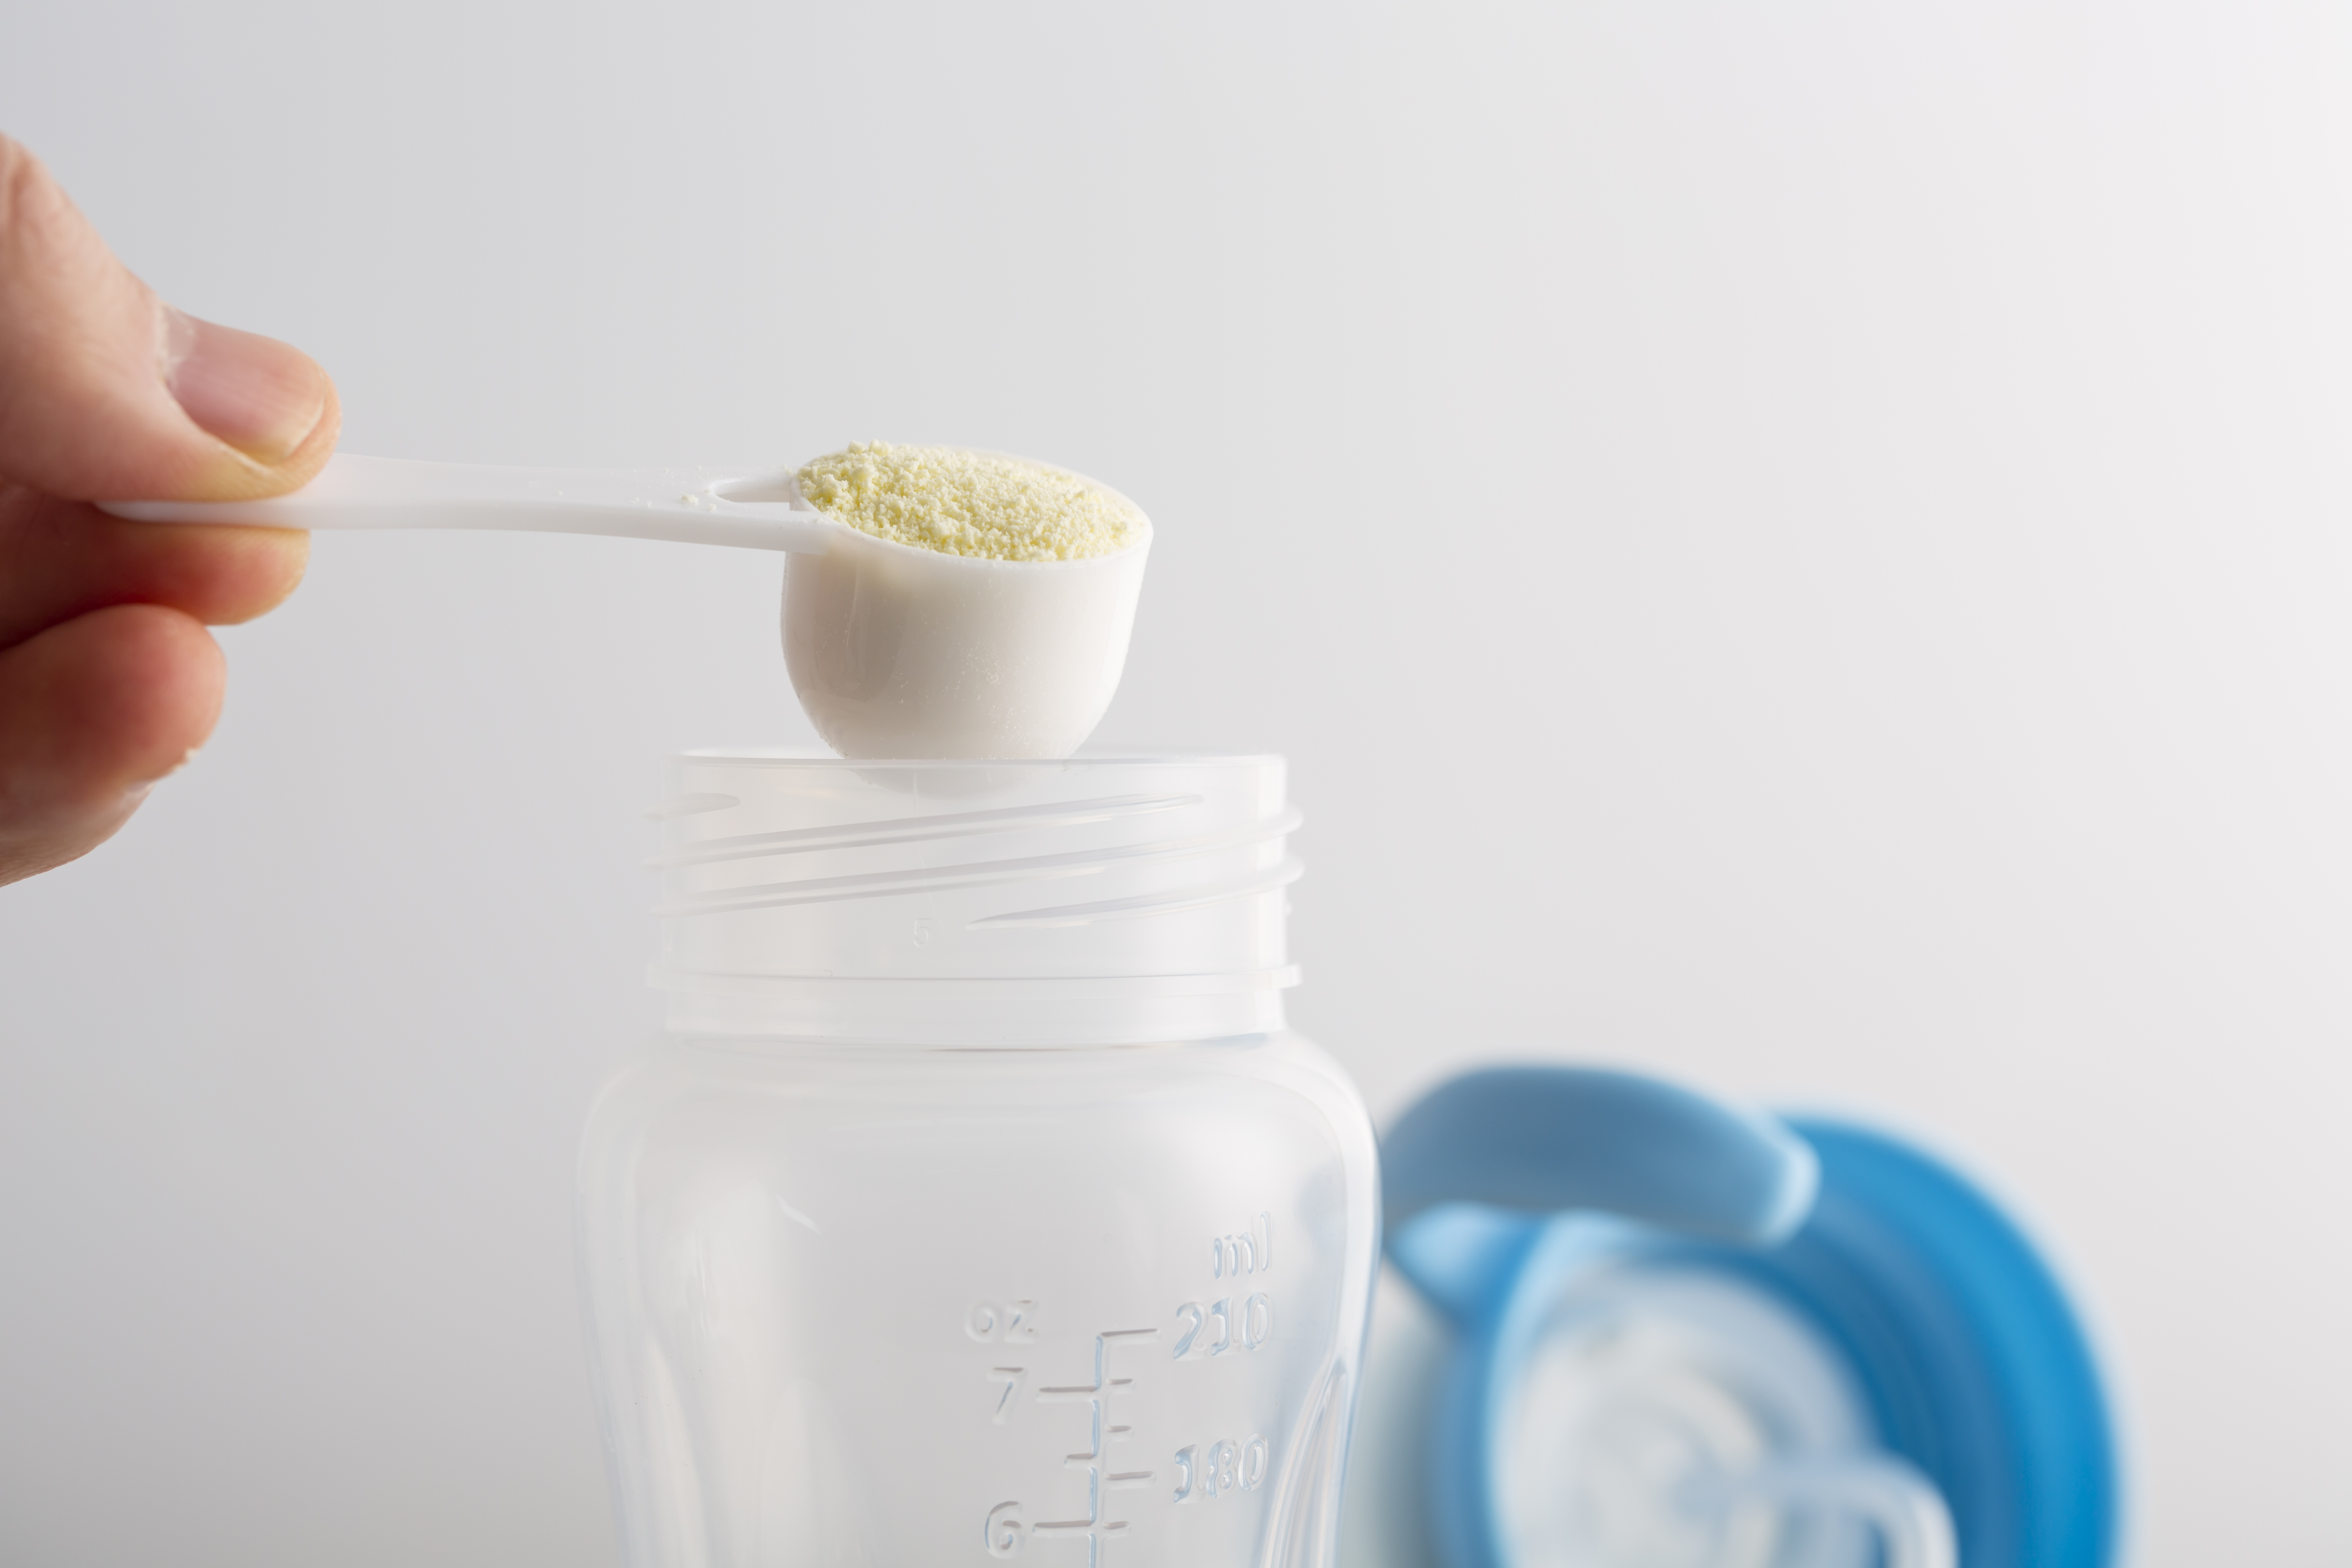 Baby formula urgently recalled over fears it could trigger seizures and sepsis